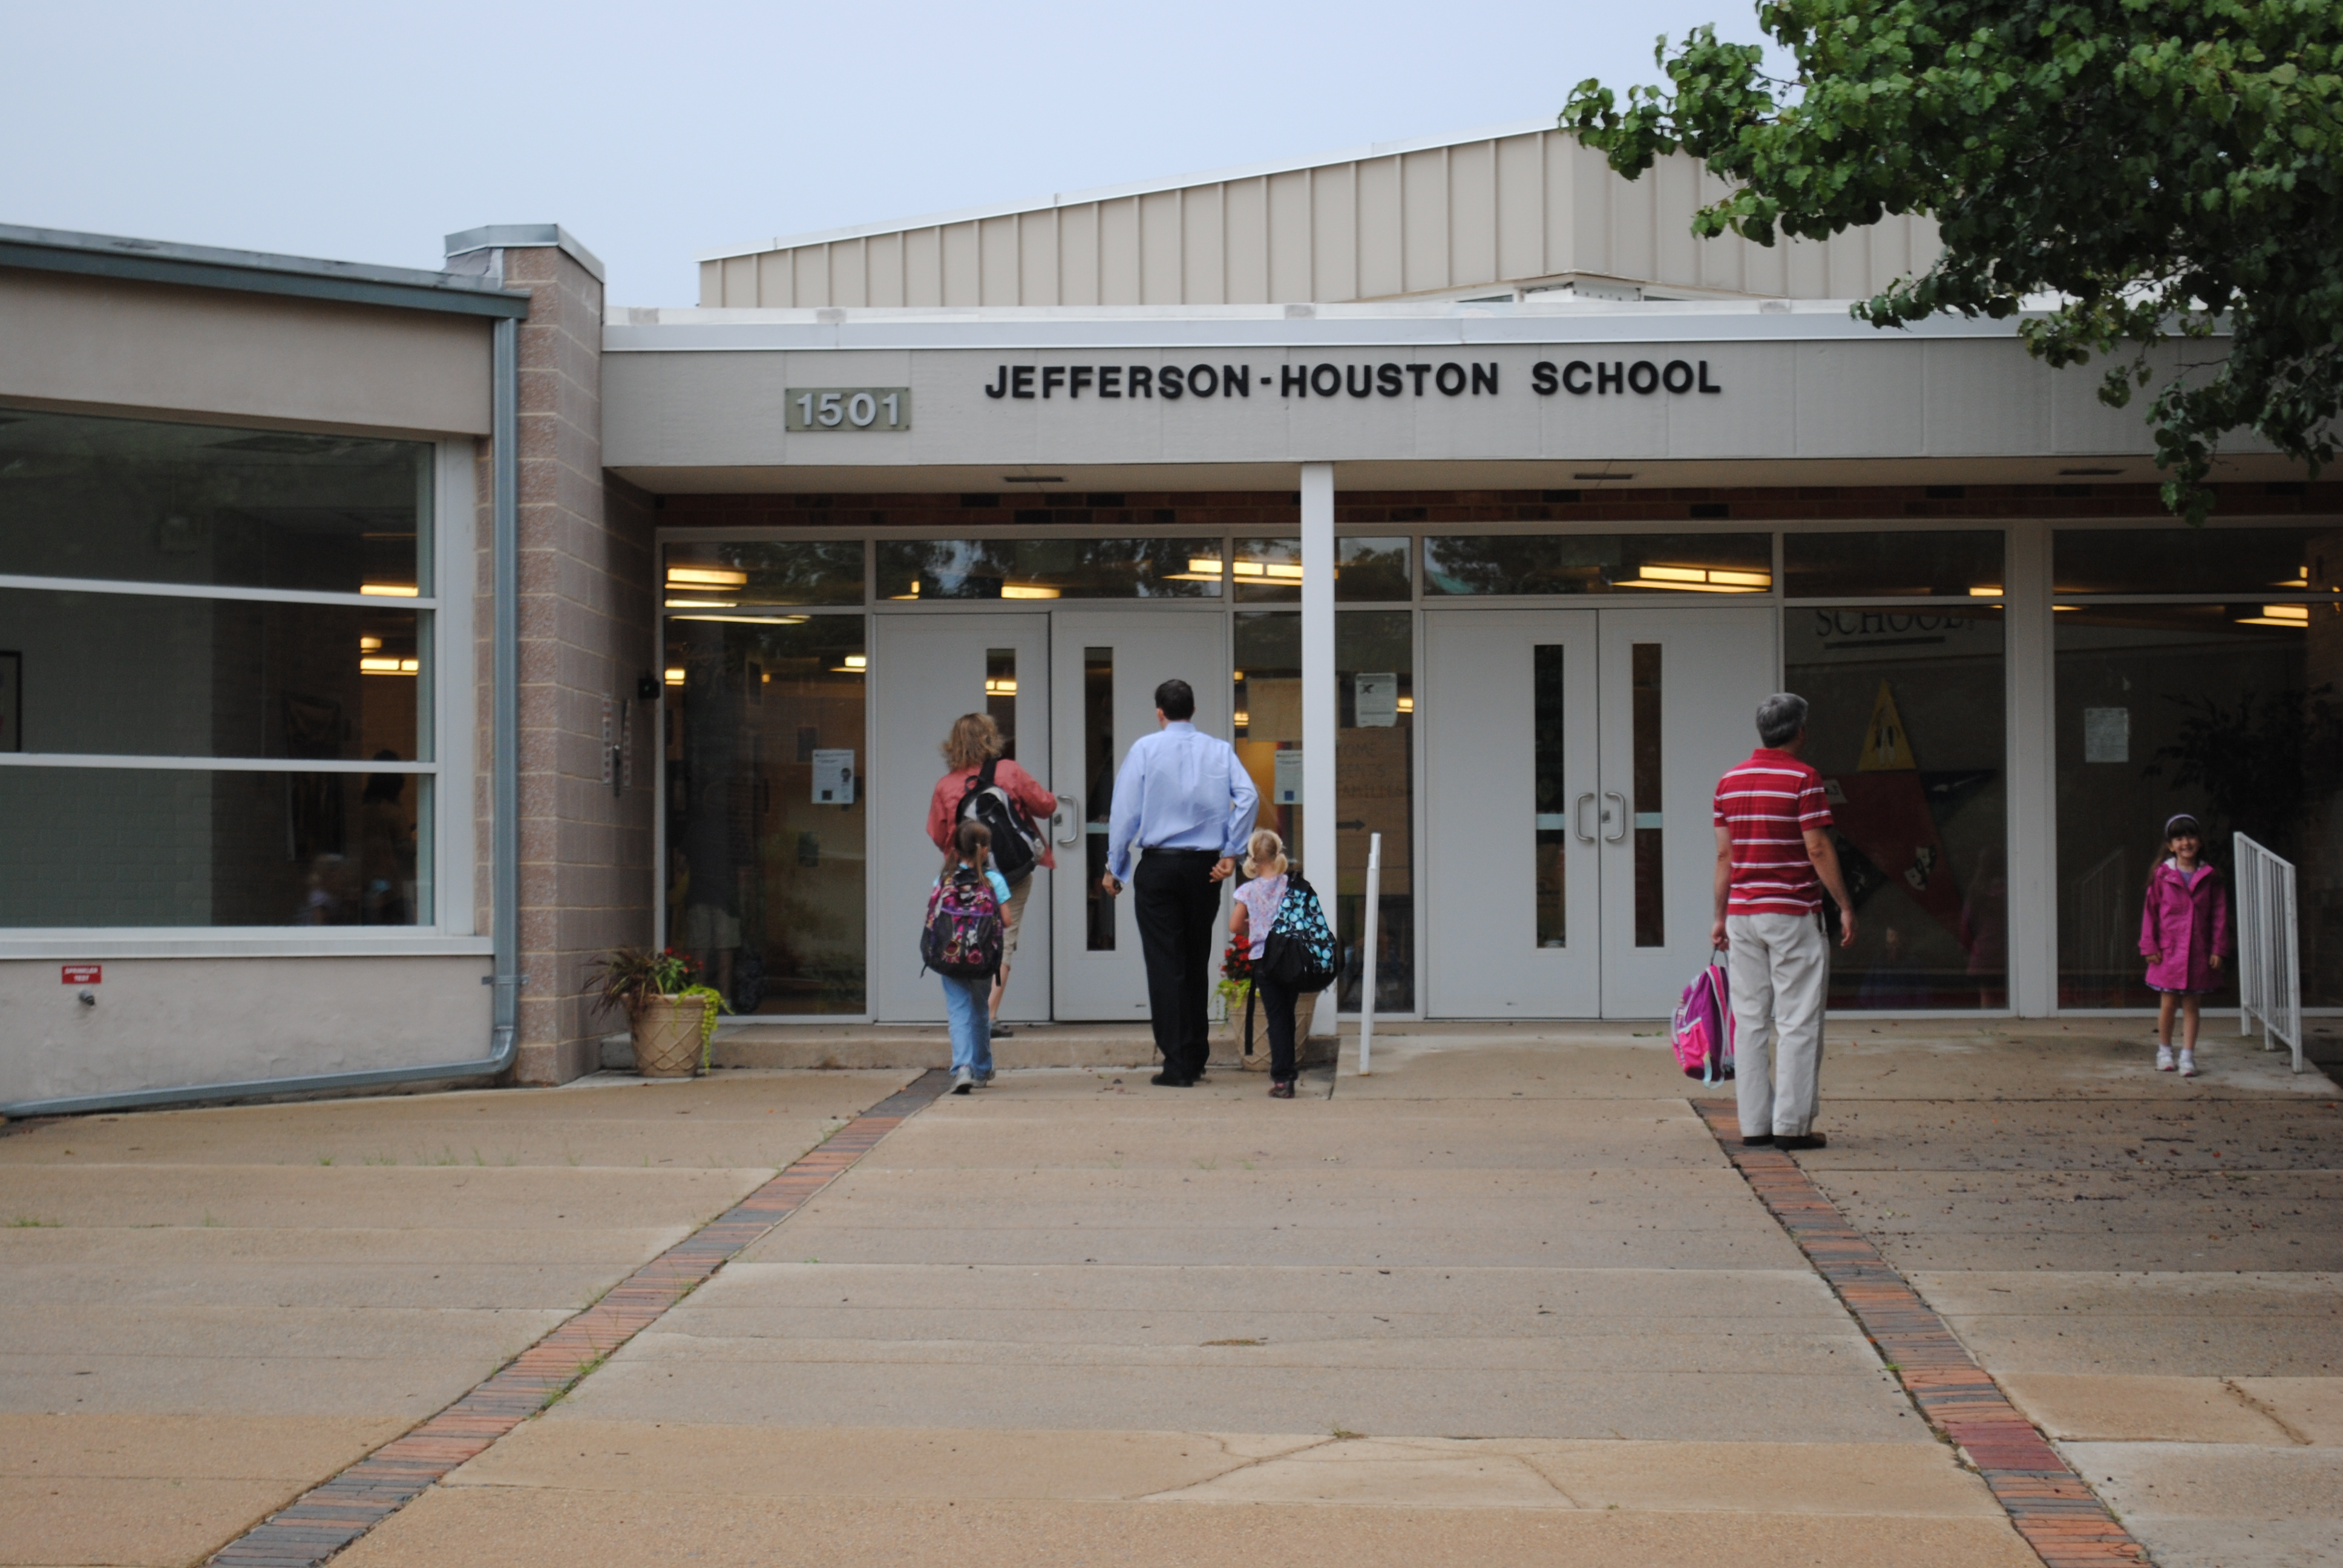 Academically, Jefferson-Houston is in a class of its own